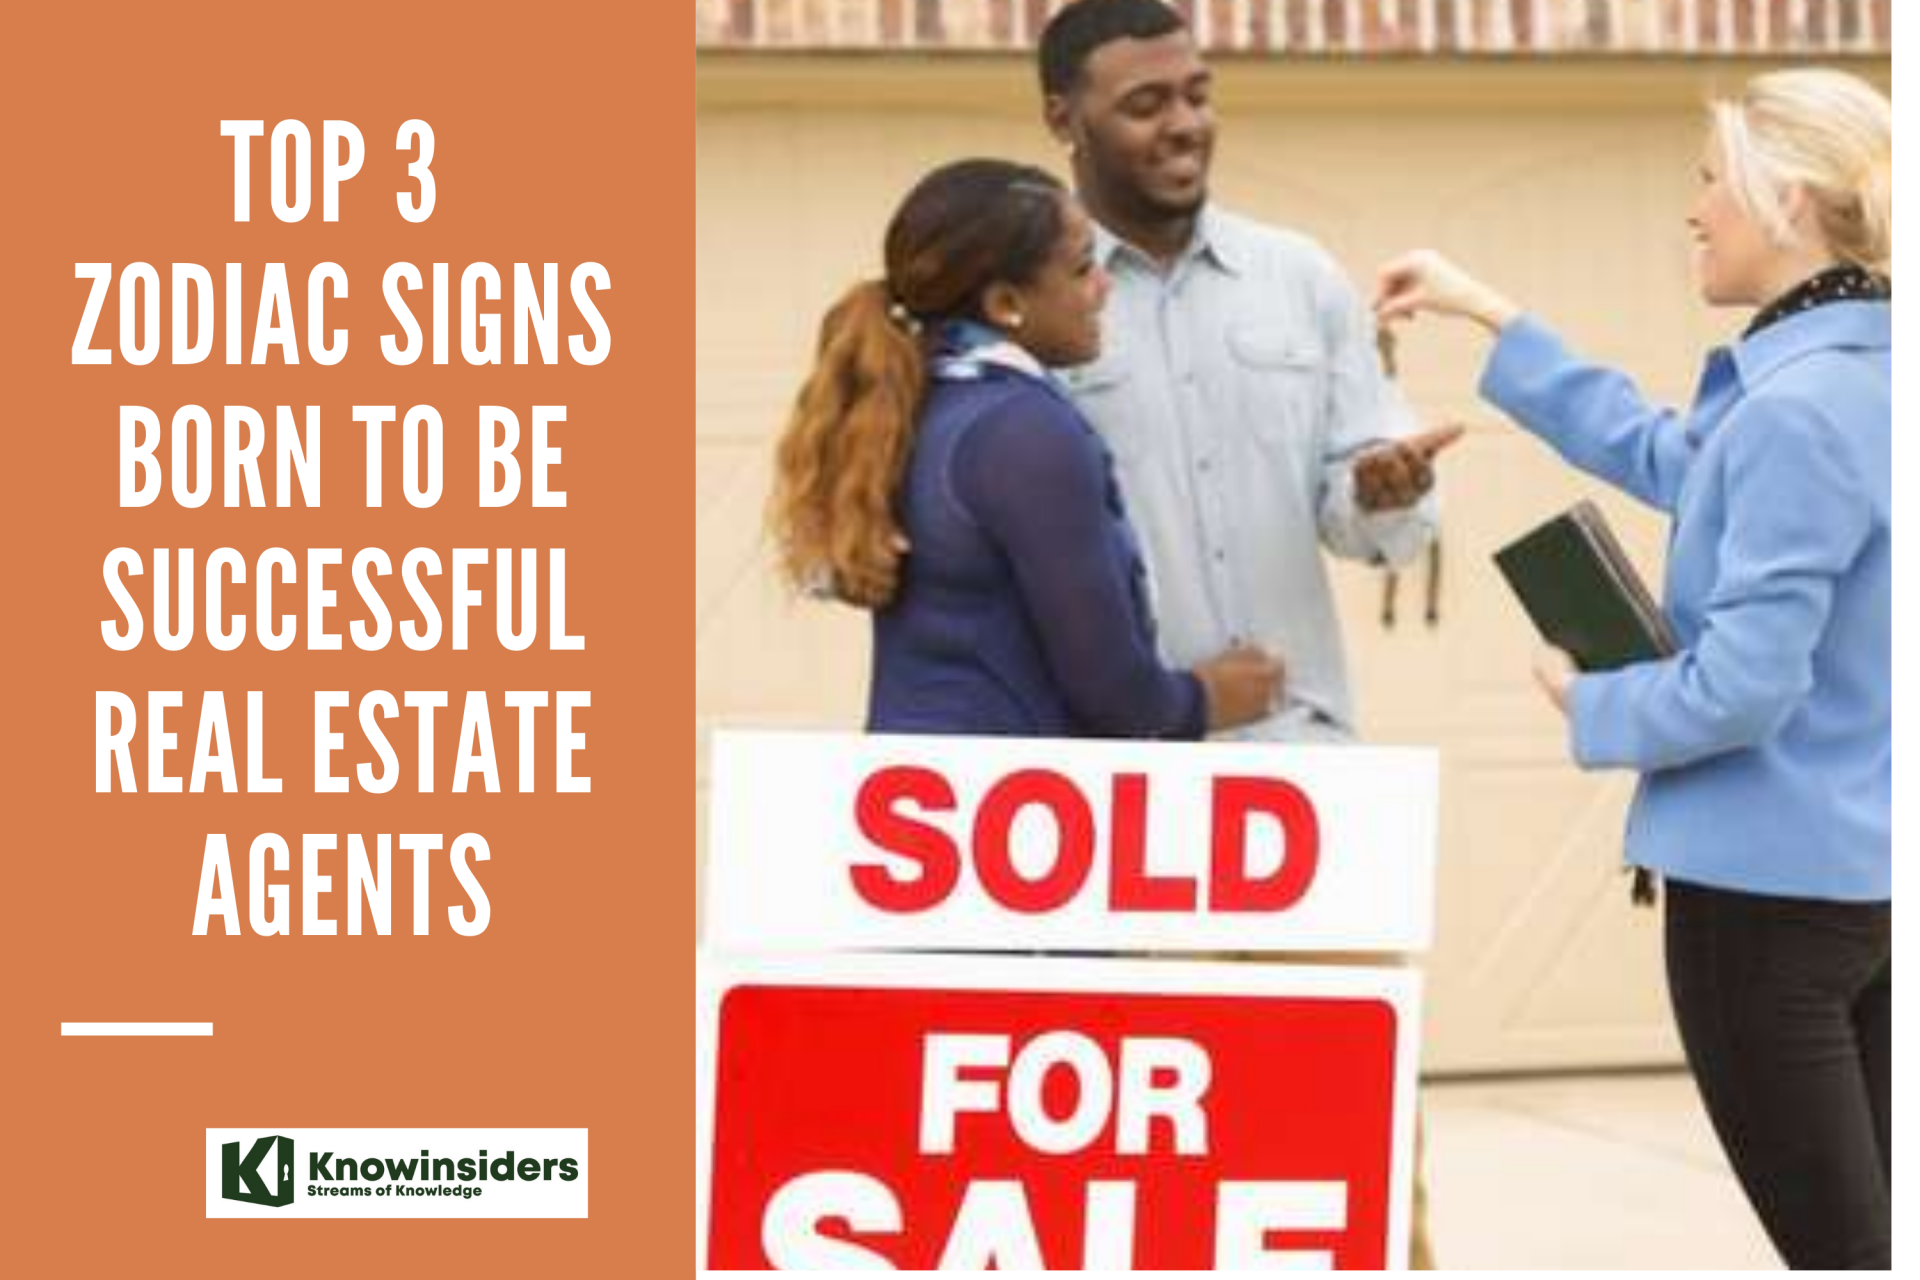 Top 3 Zodiac Signs Born To Be Successful Real Estate Agents